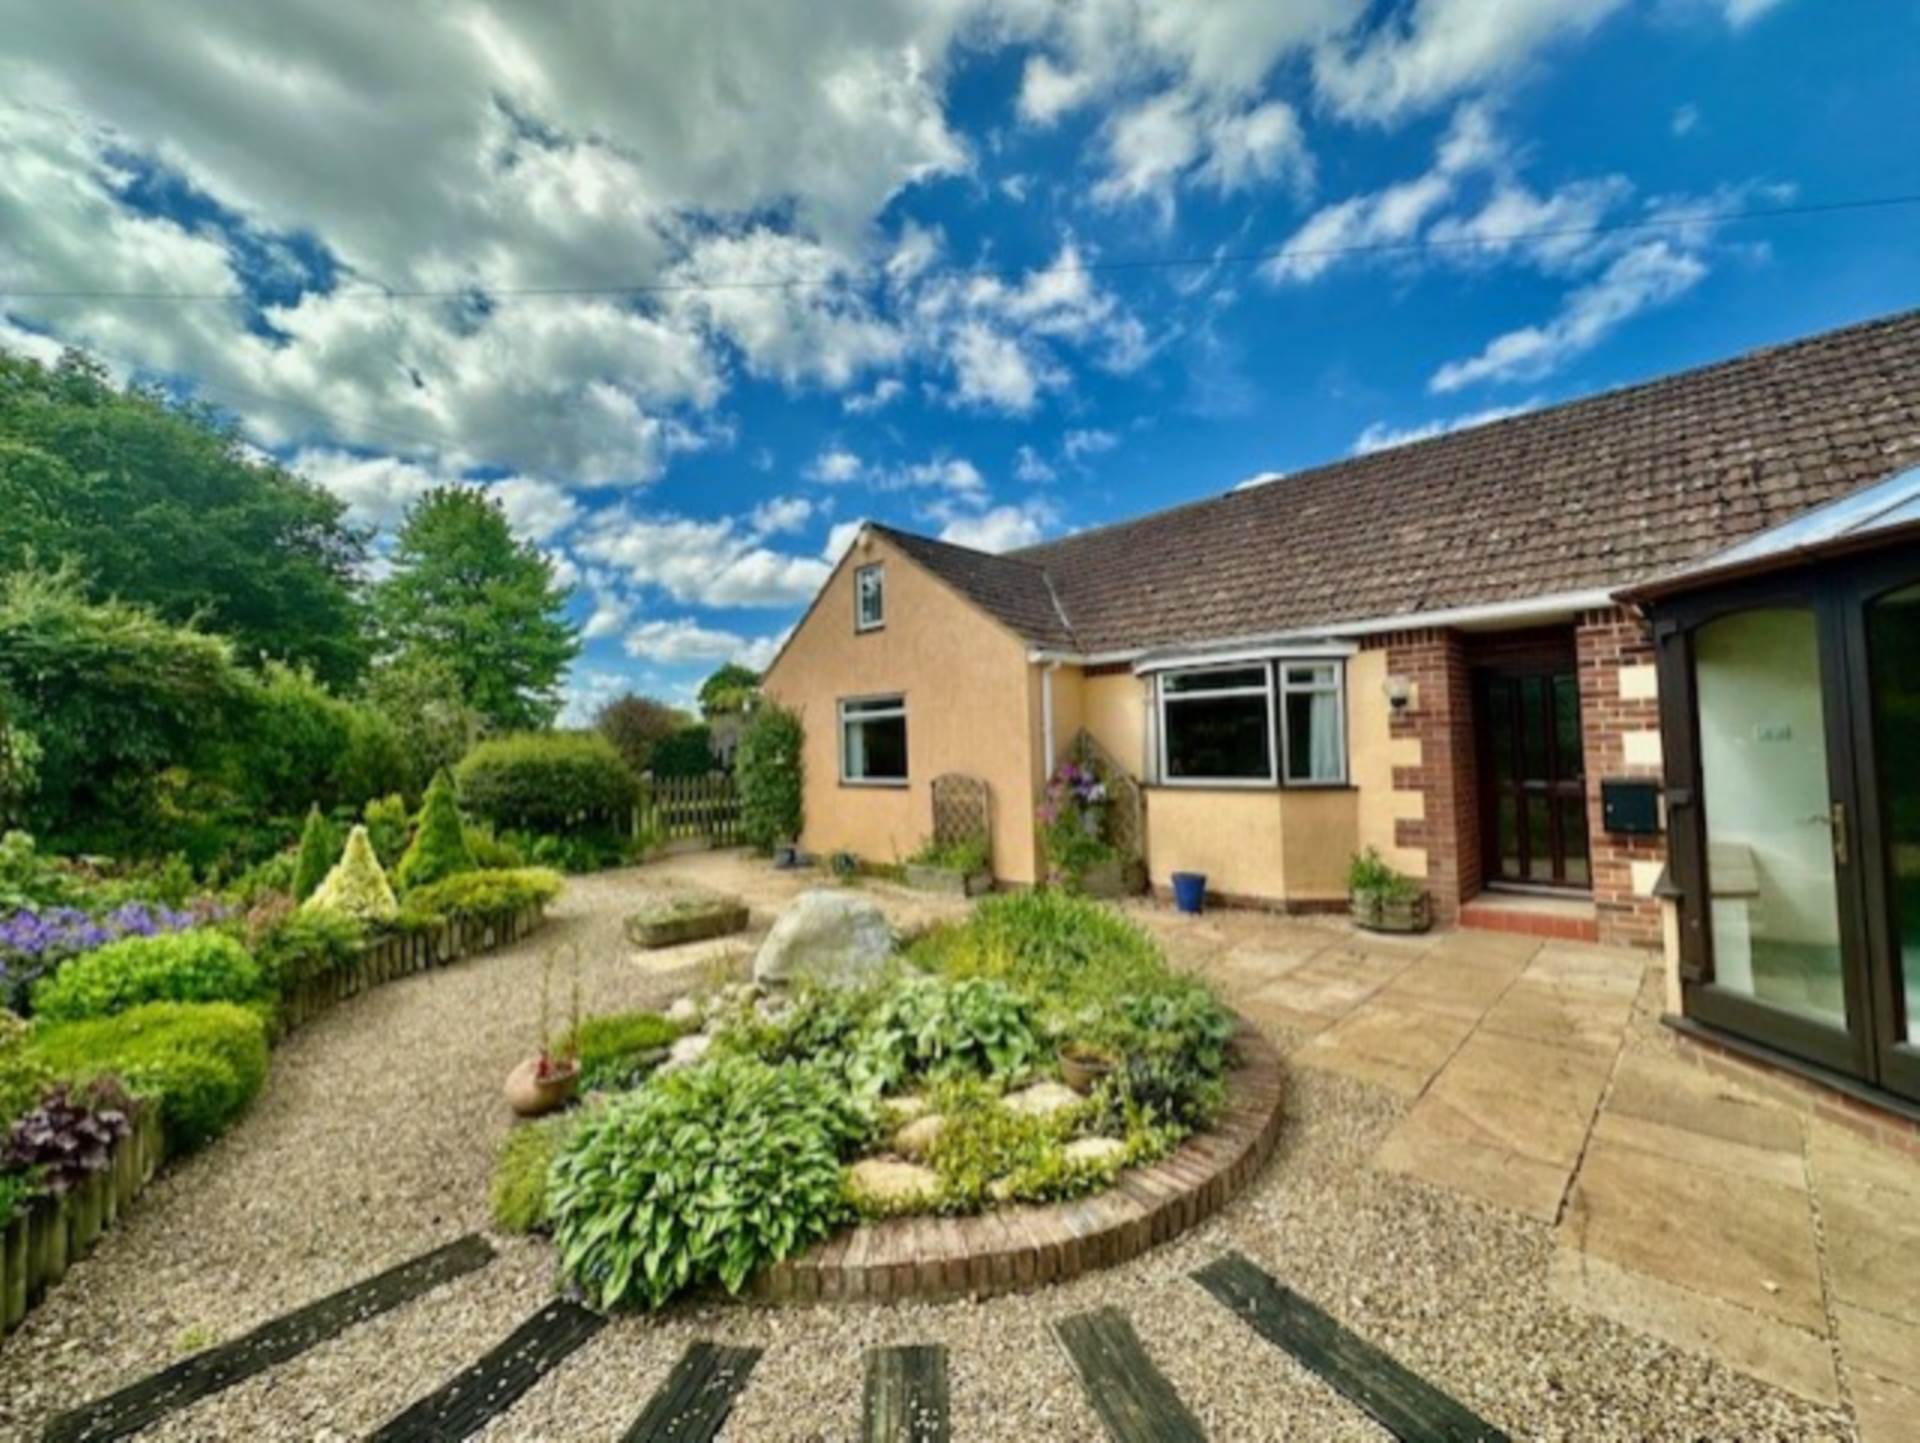 4 bed Bungalow for rent in Woolverton. From Swallows Property Letting - Frome